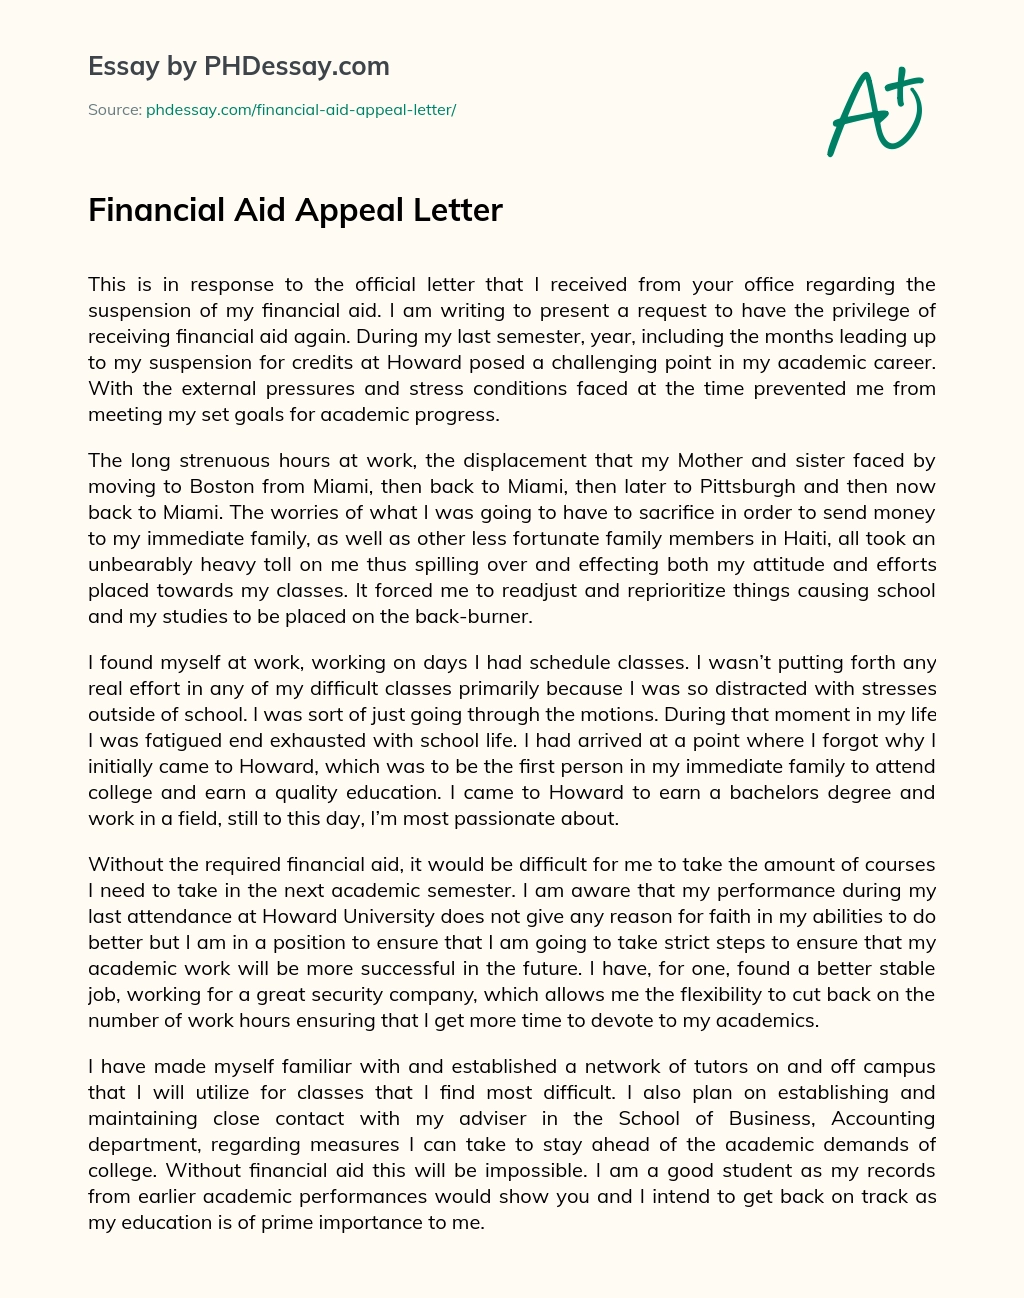 Financial Aid Appeal Letter - PHDessay.com